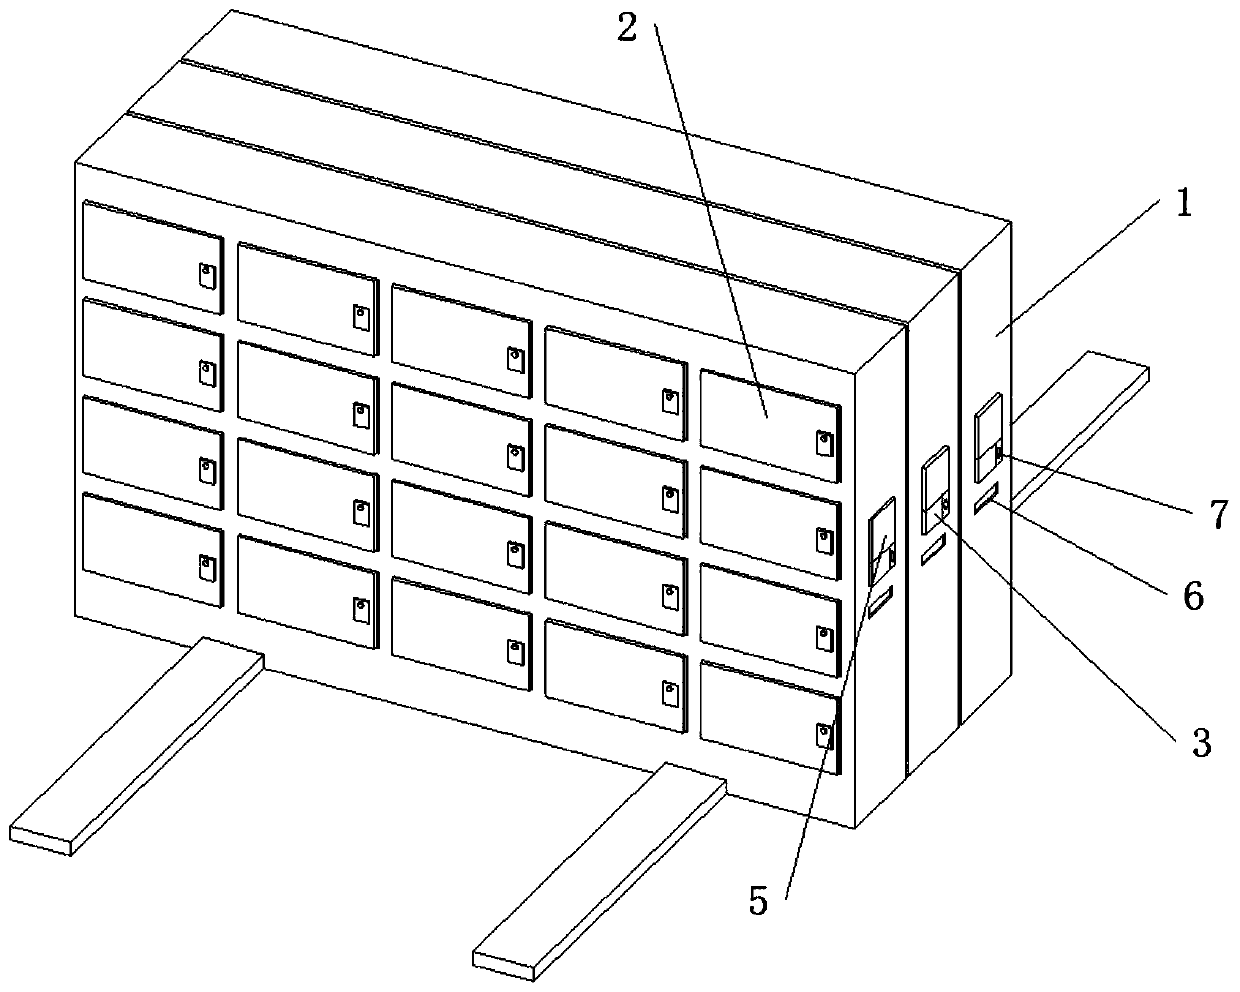 Intelligent compact shelve based on memory and registration functions